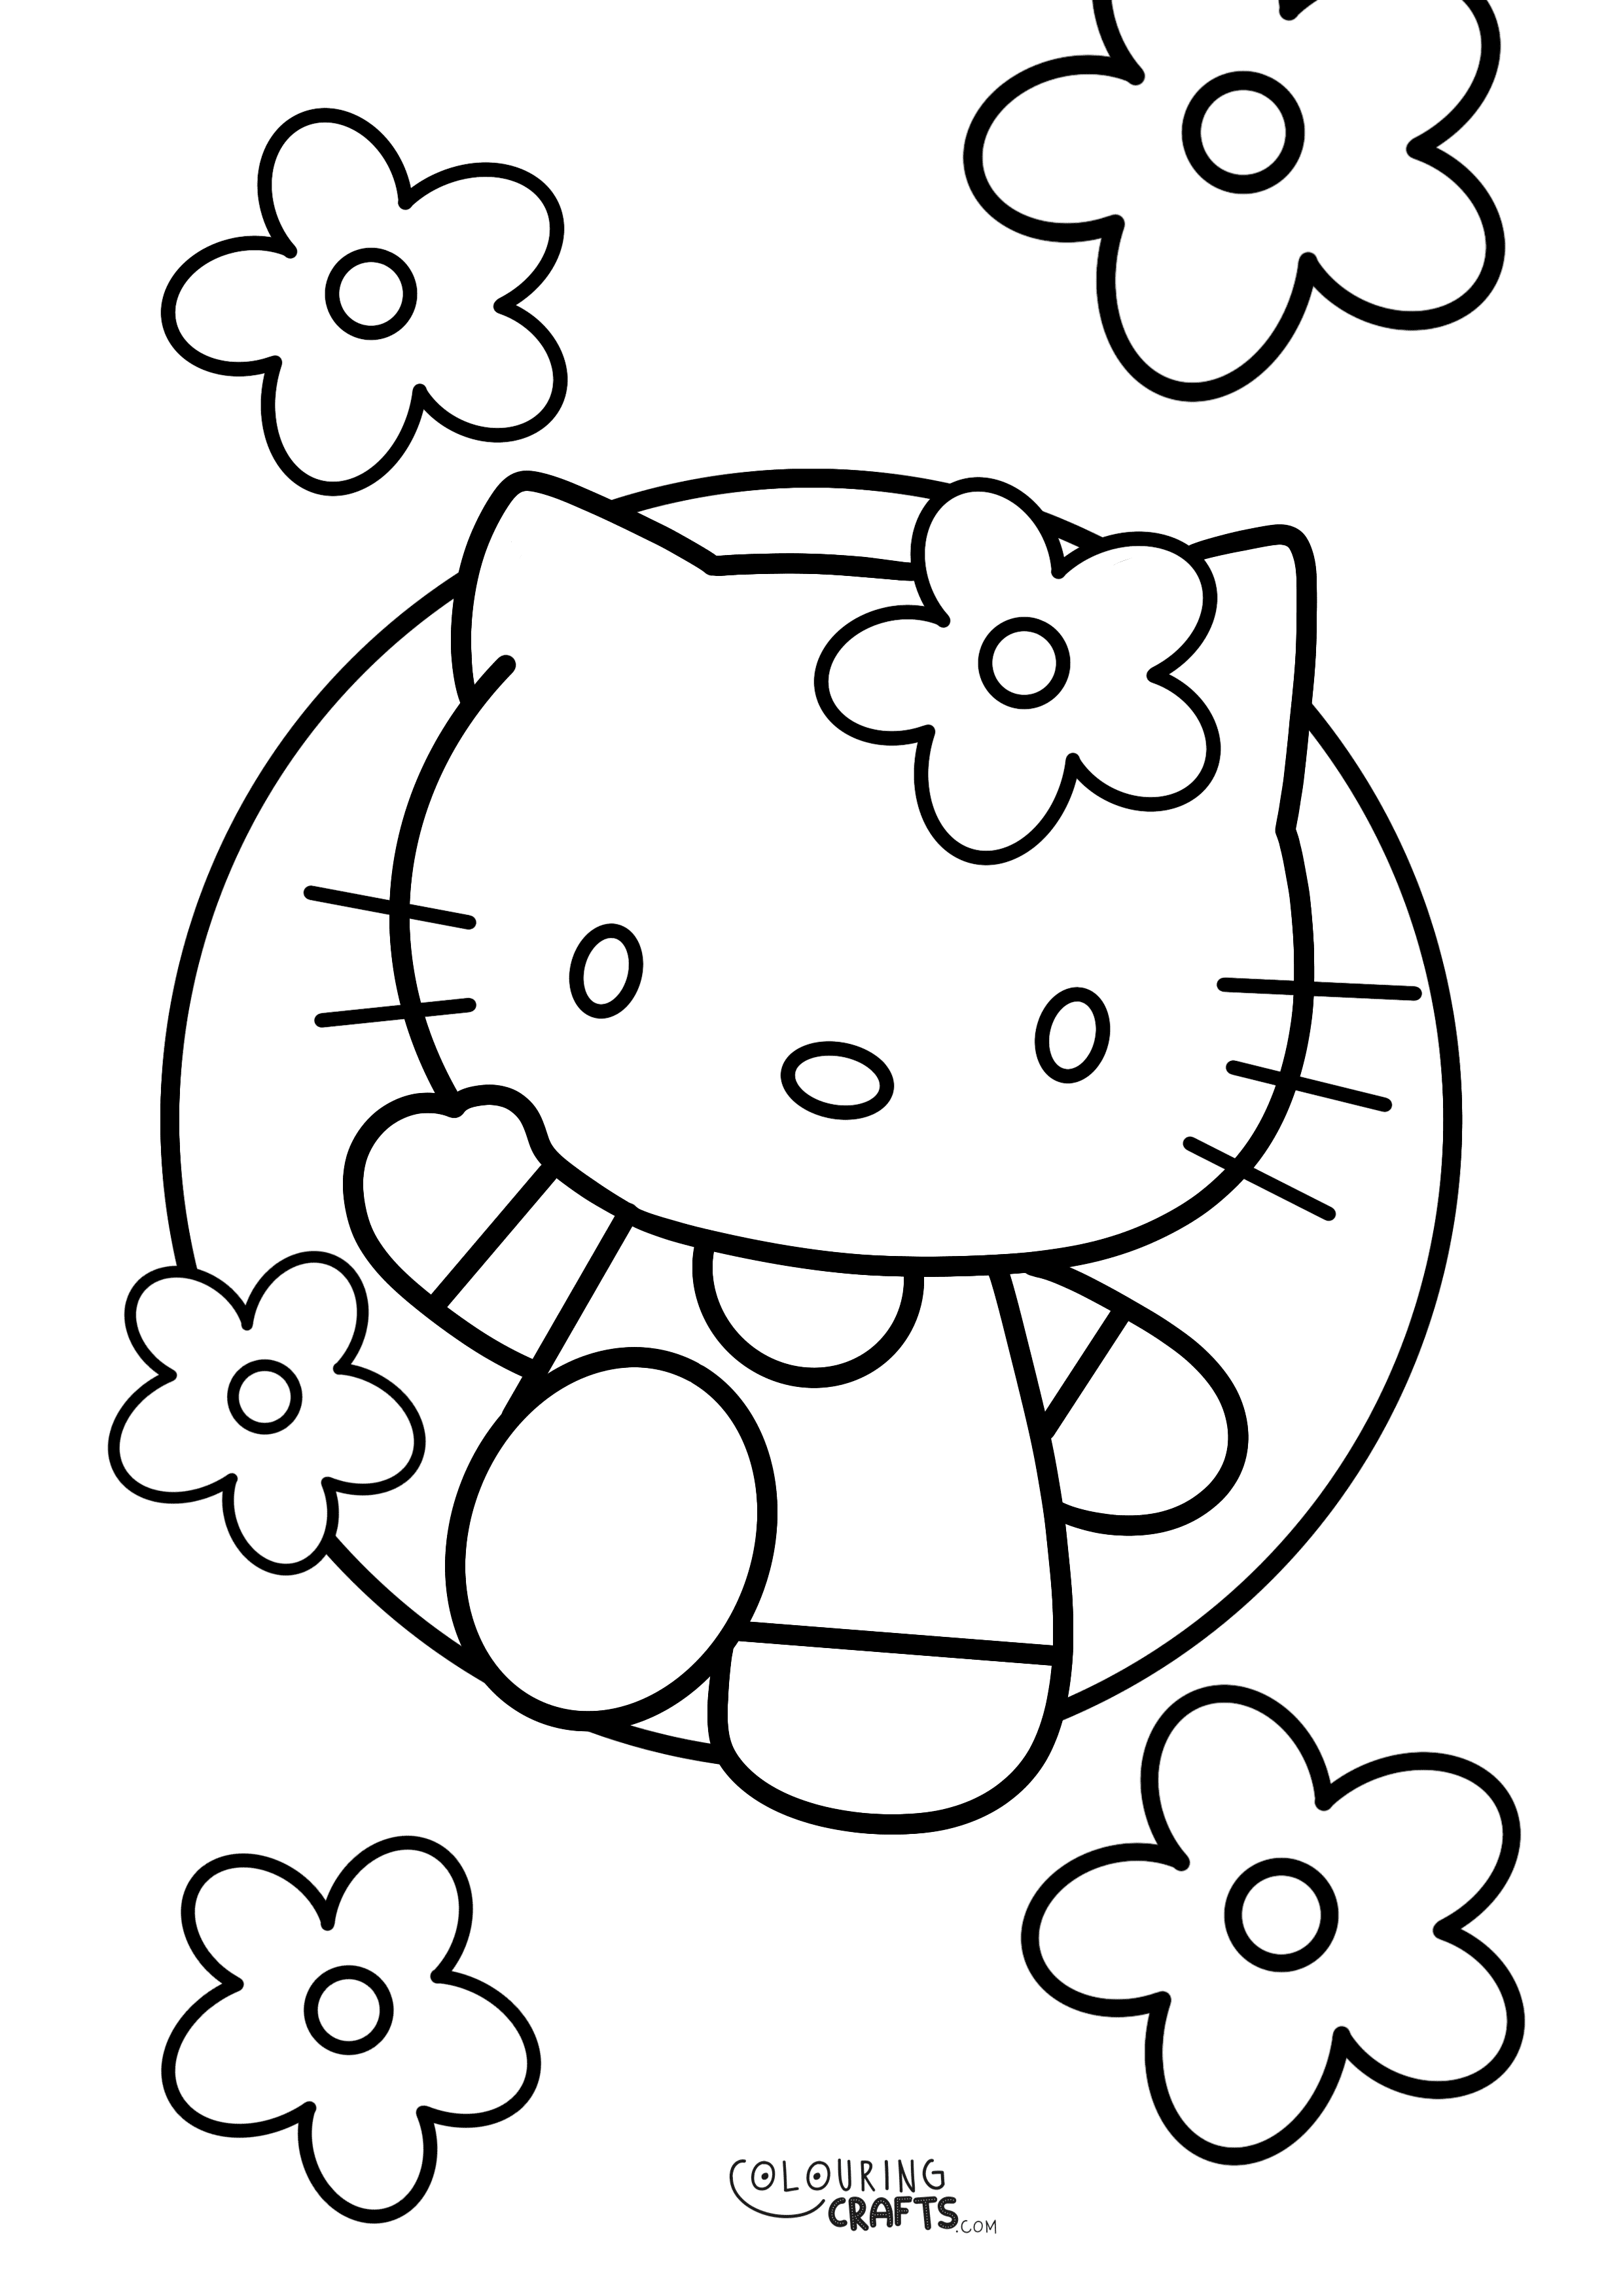 Hello Kitty Colouring Page 1 - Colouring Crafts